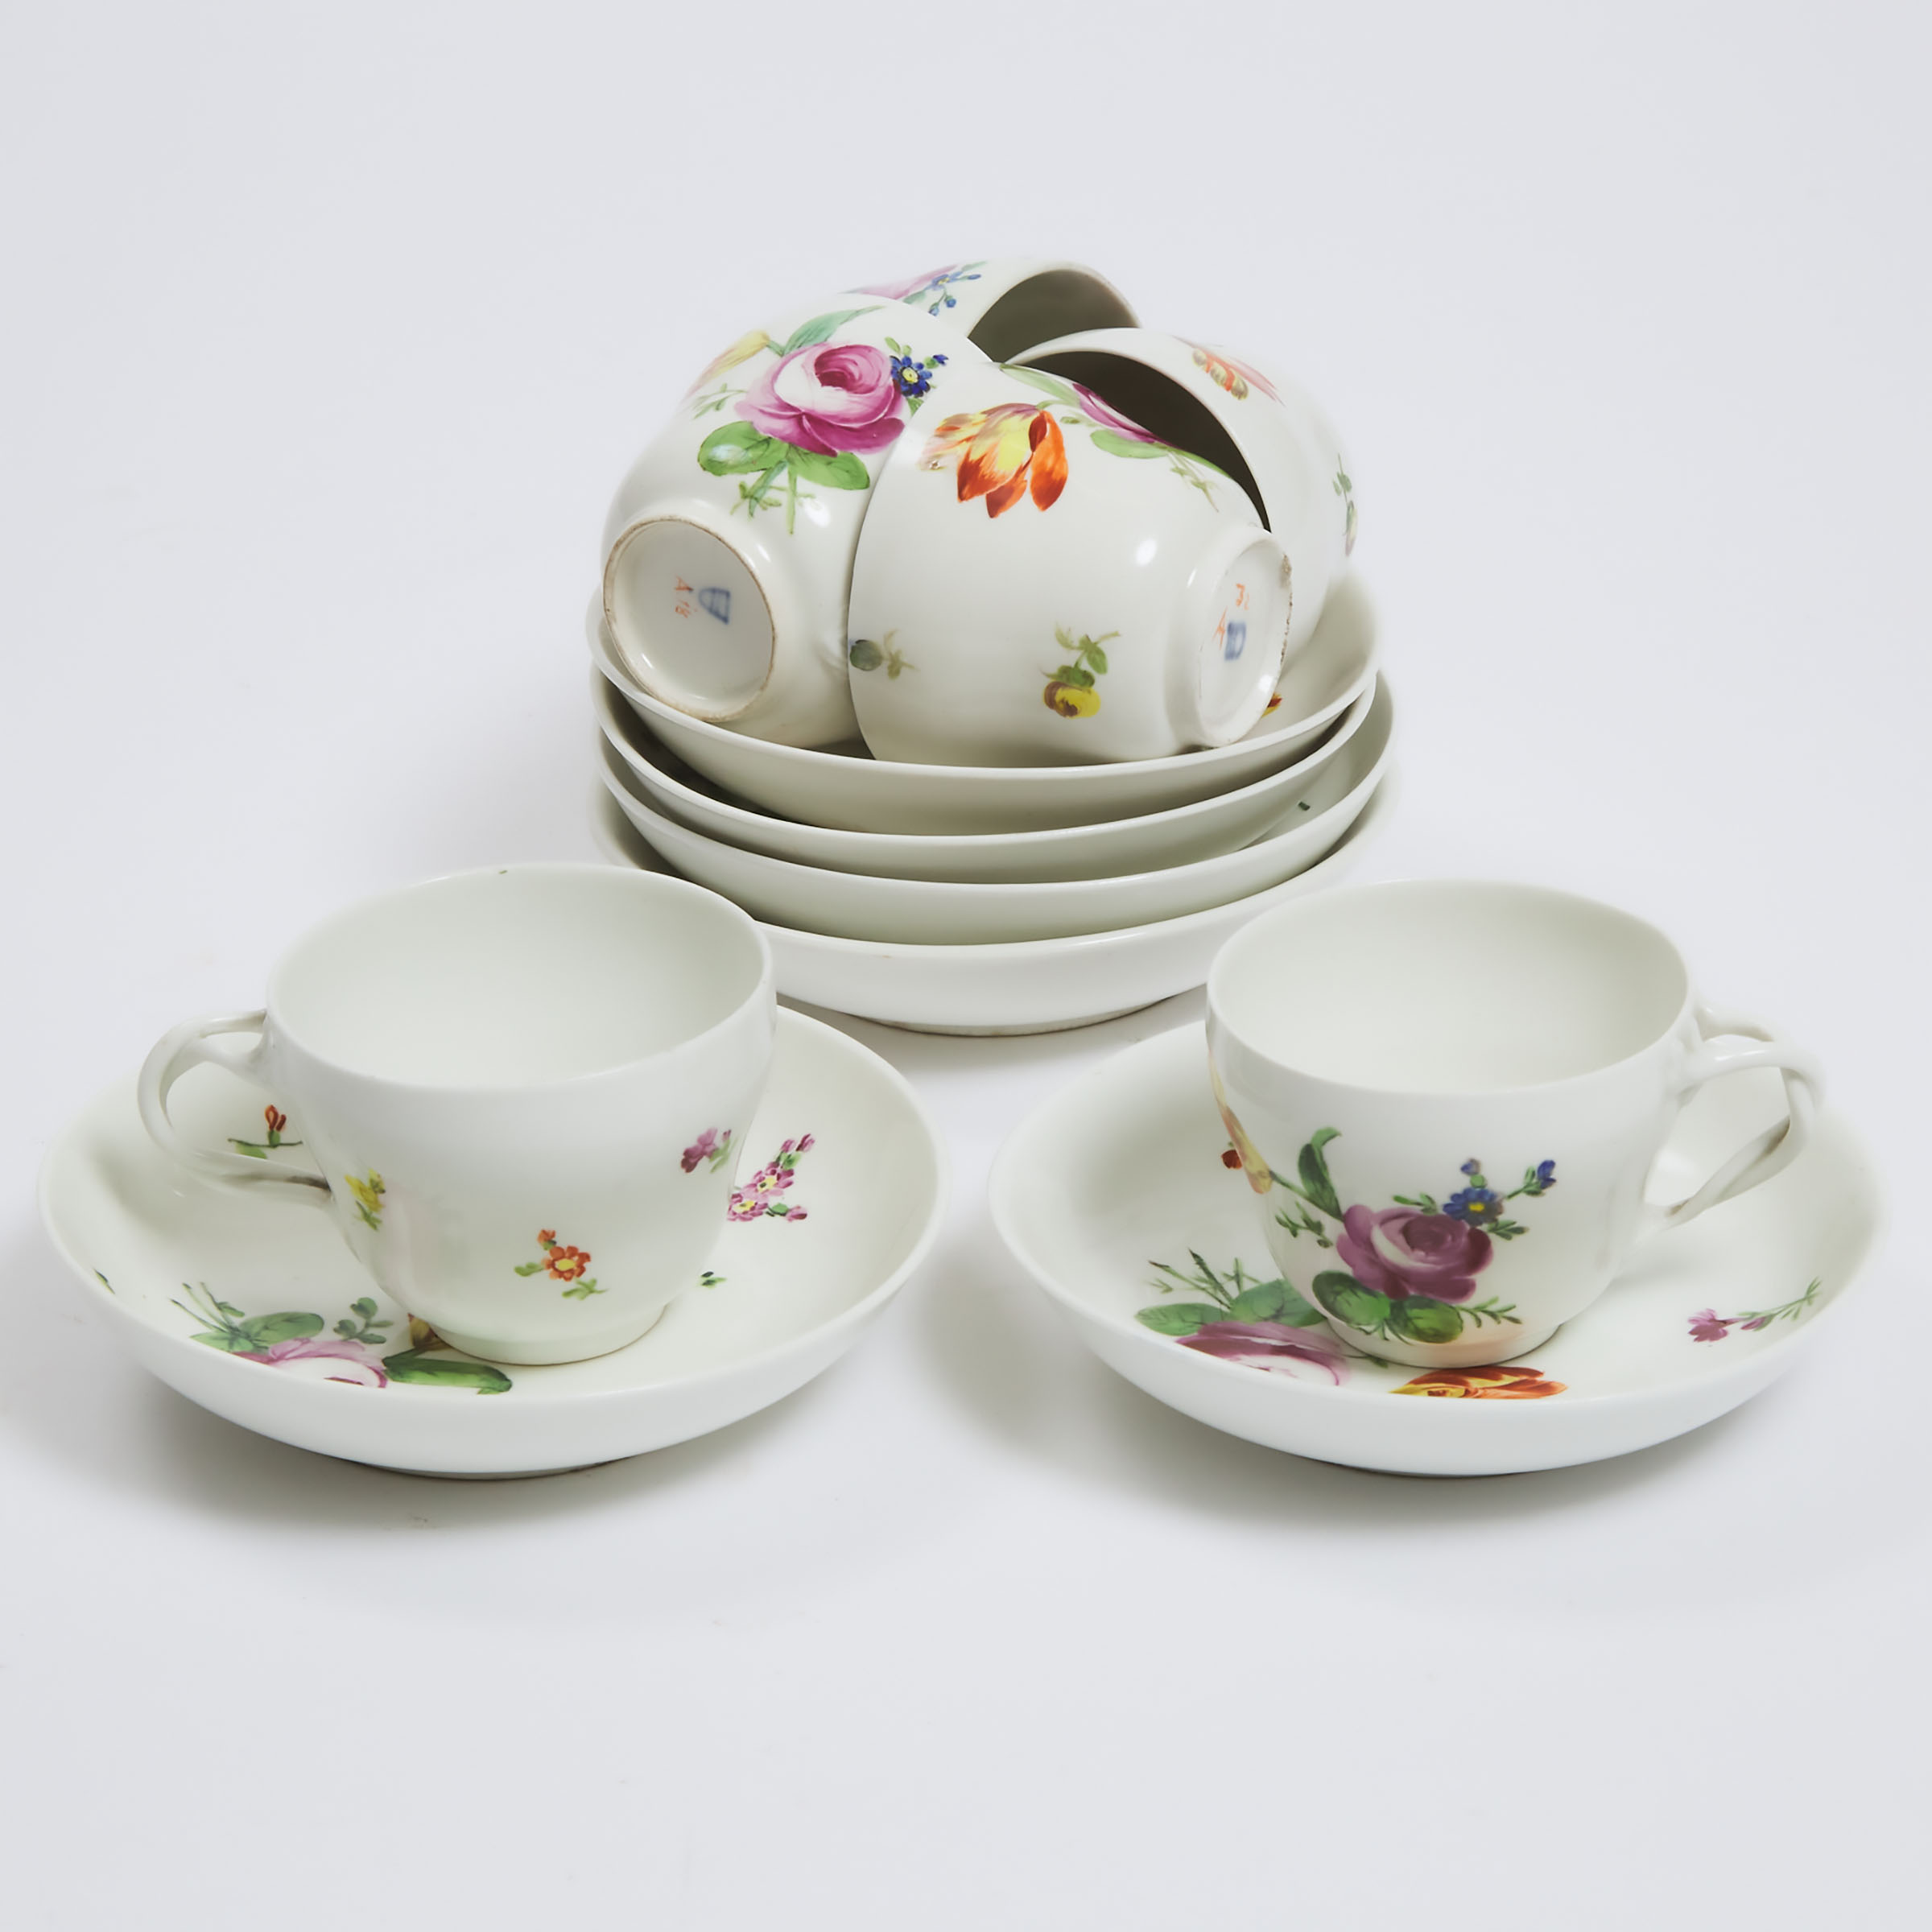 Six Vienna Flower Painted Cups and Saucers, late 18th/early 19th century